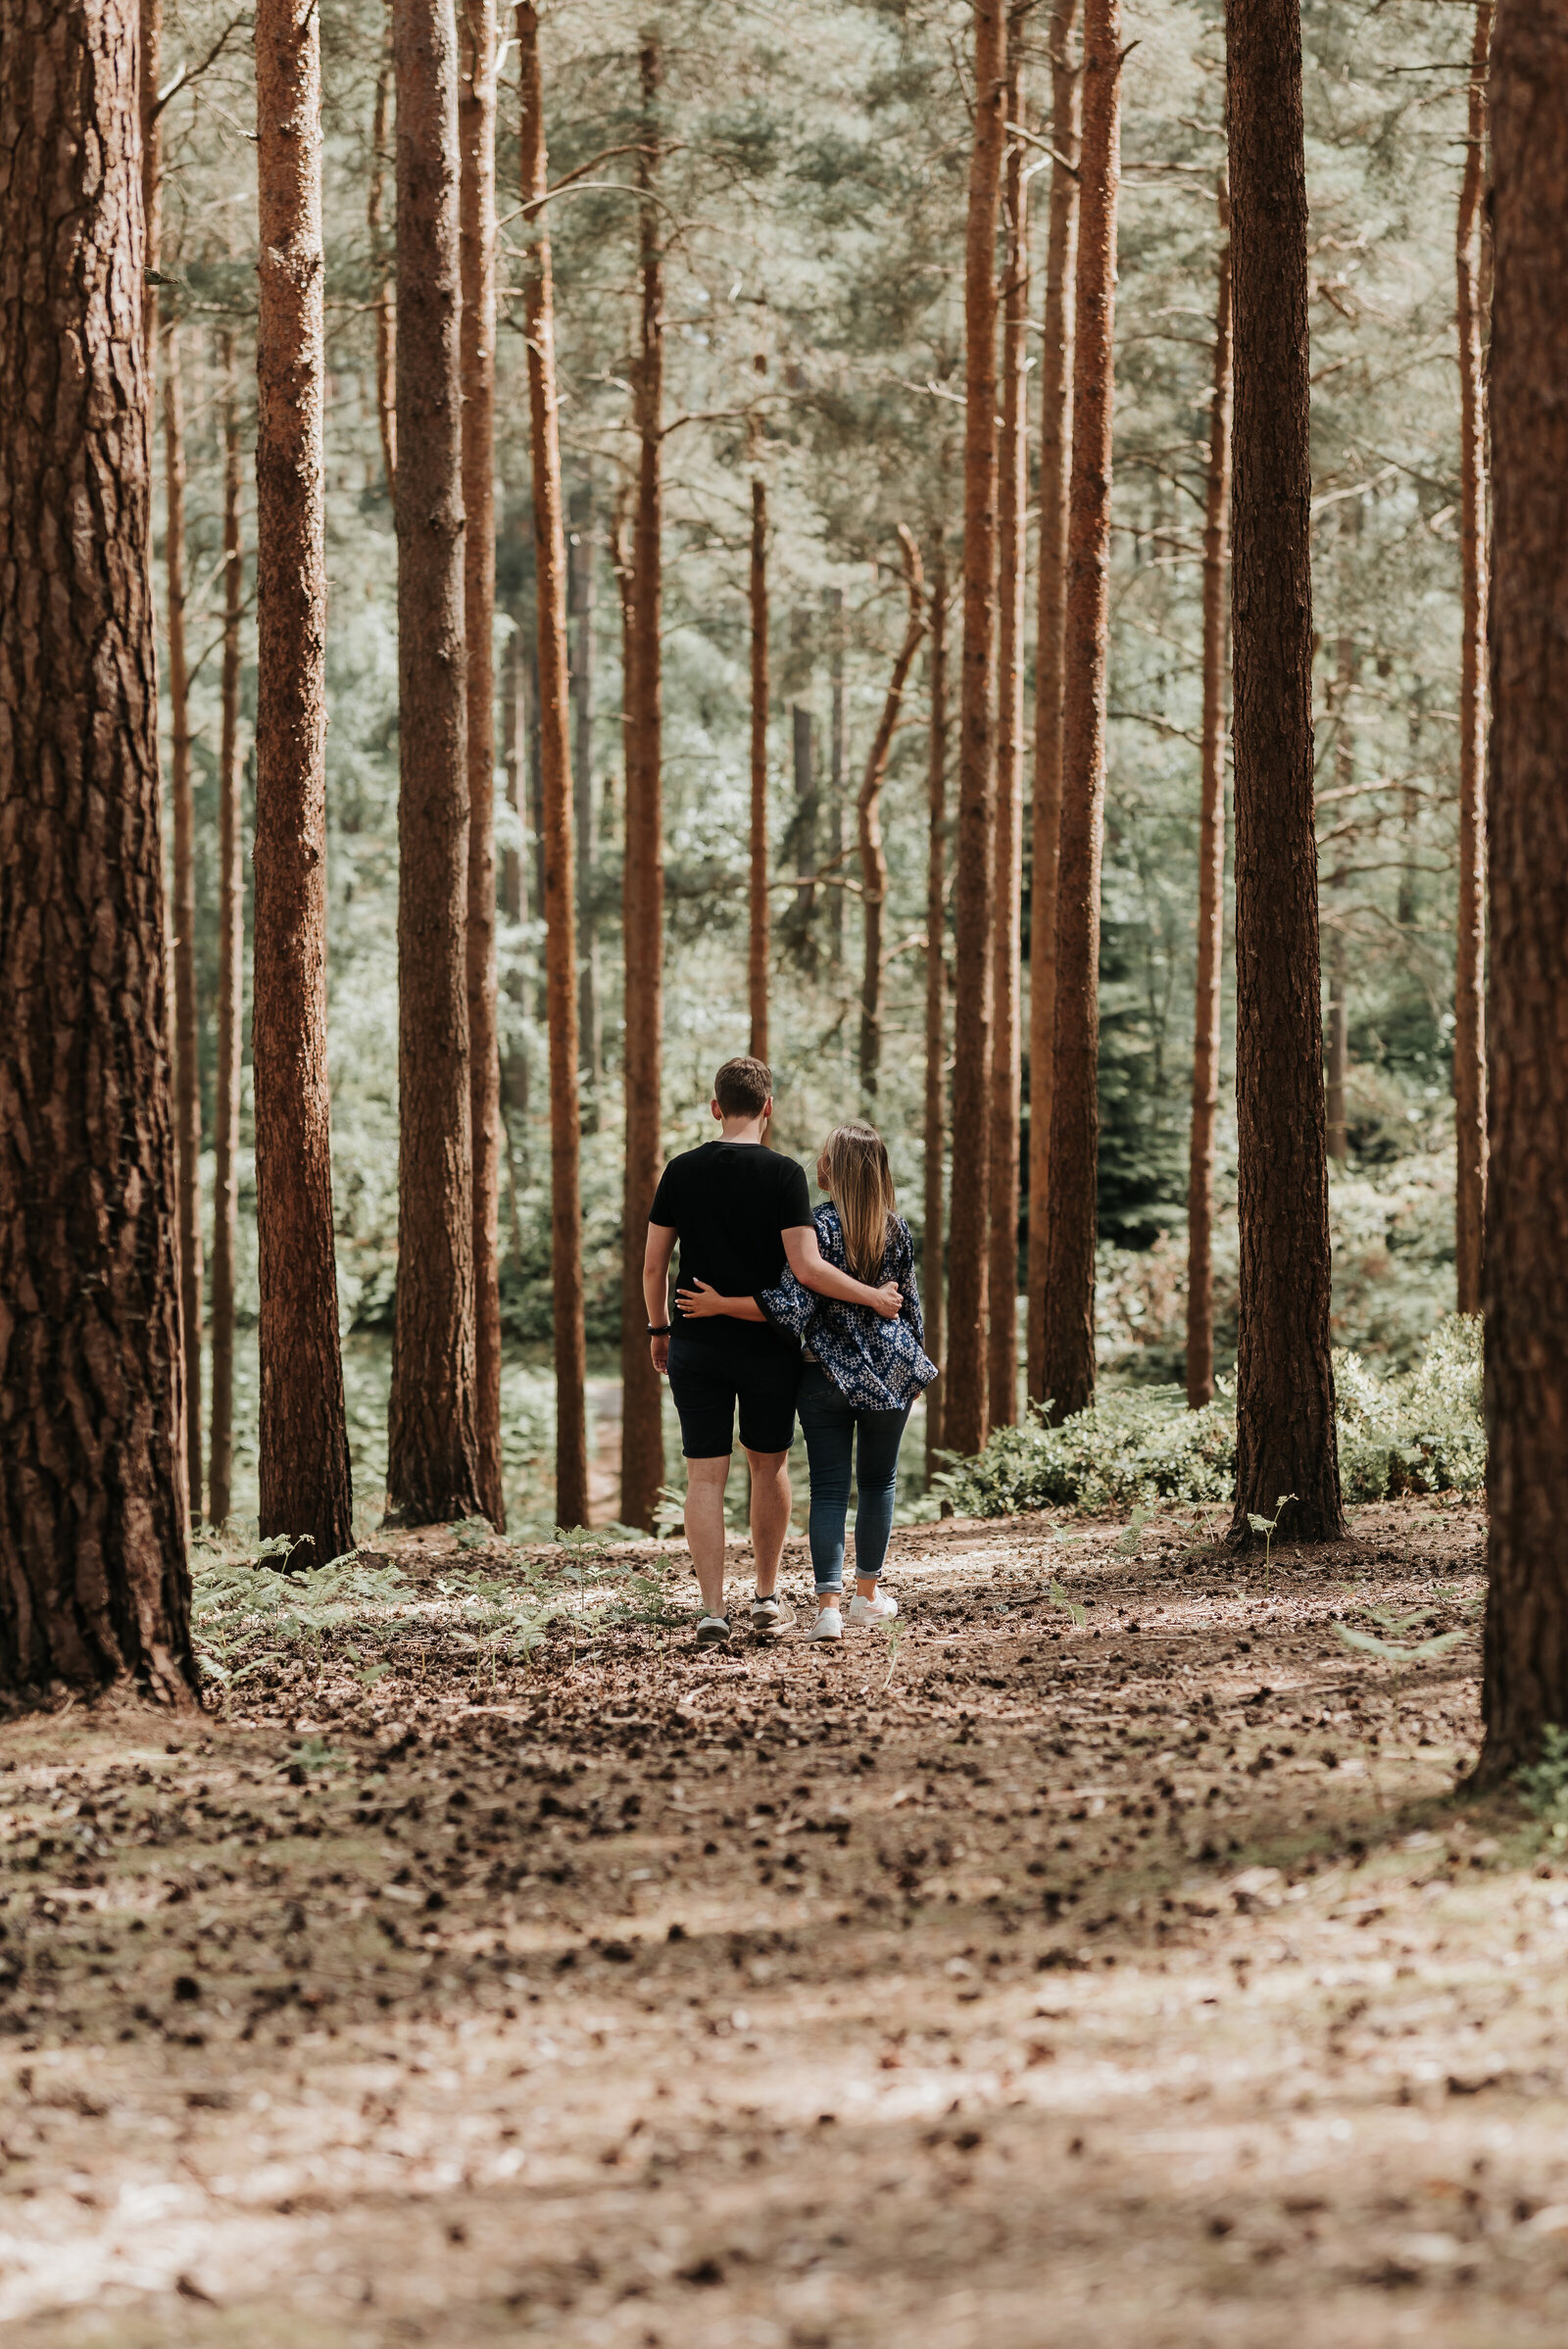 Couple walk with arms around each other along woodland pathway, through tall trees